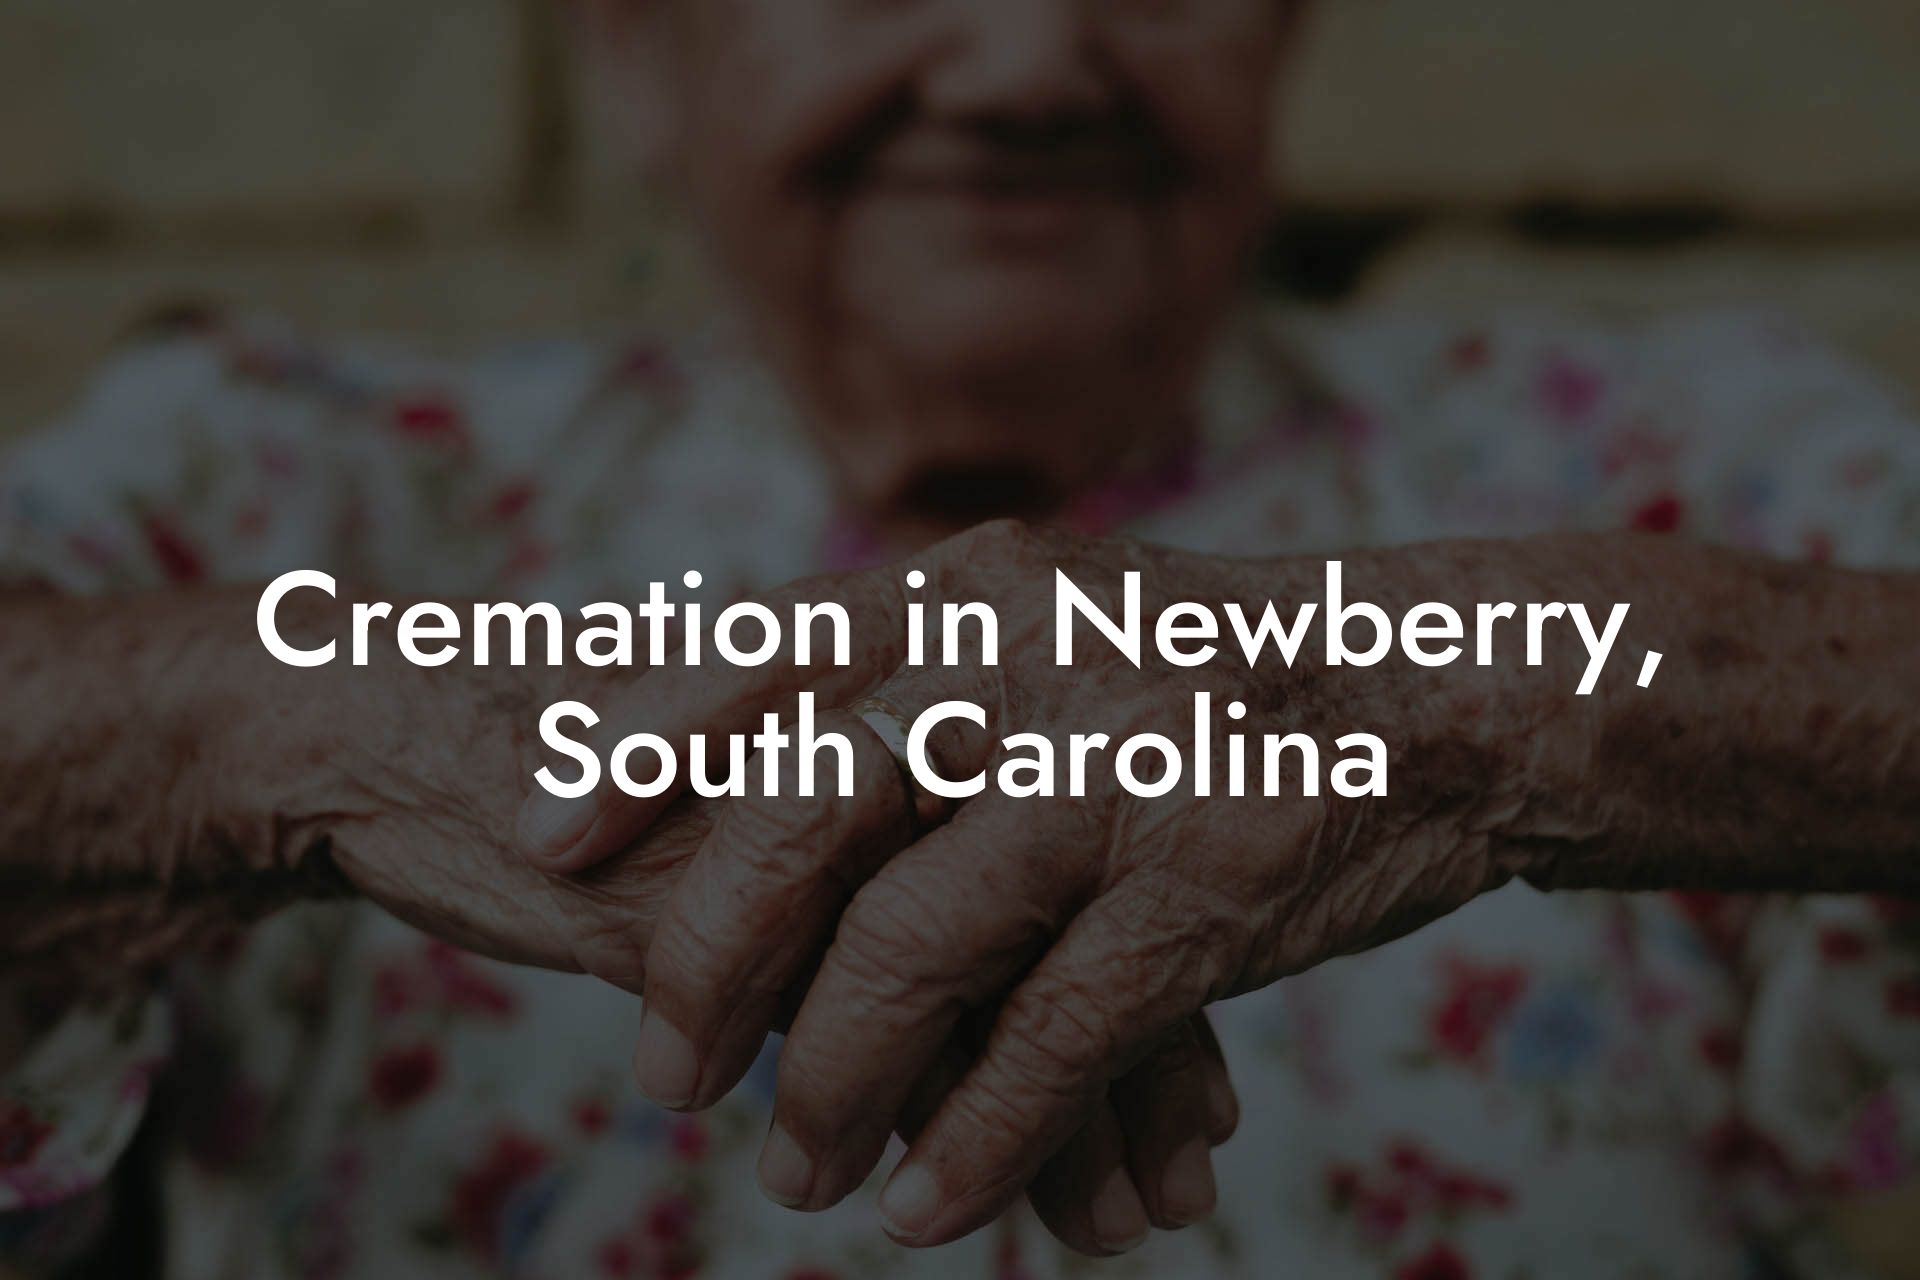 Cremation in Newberry, South Carolina